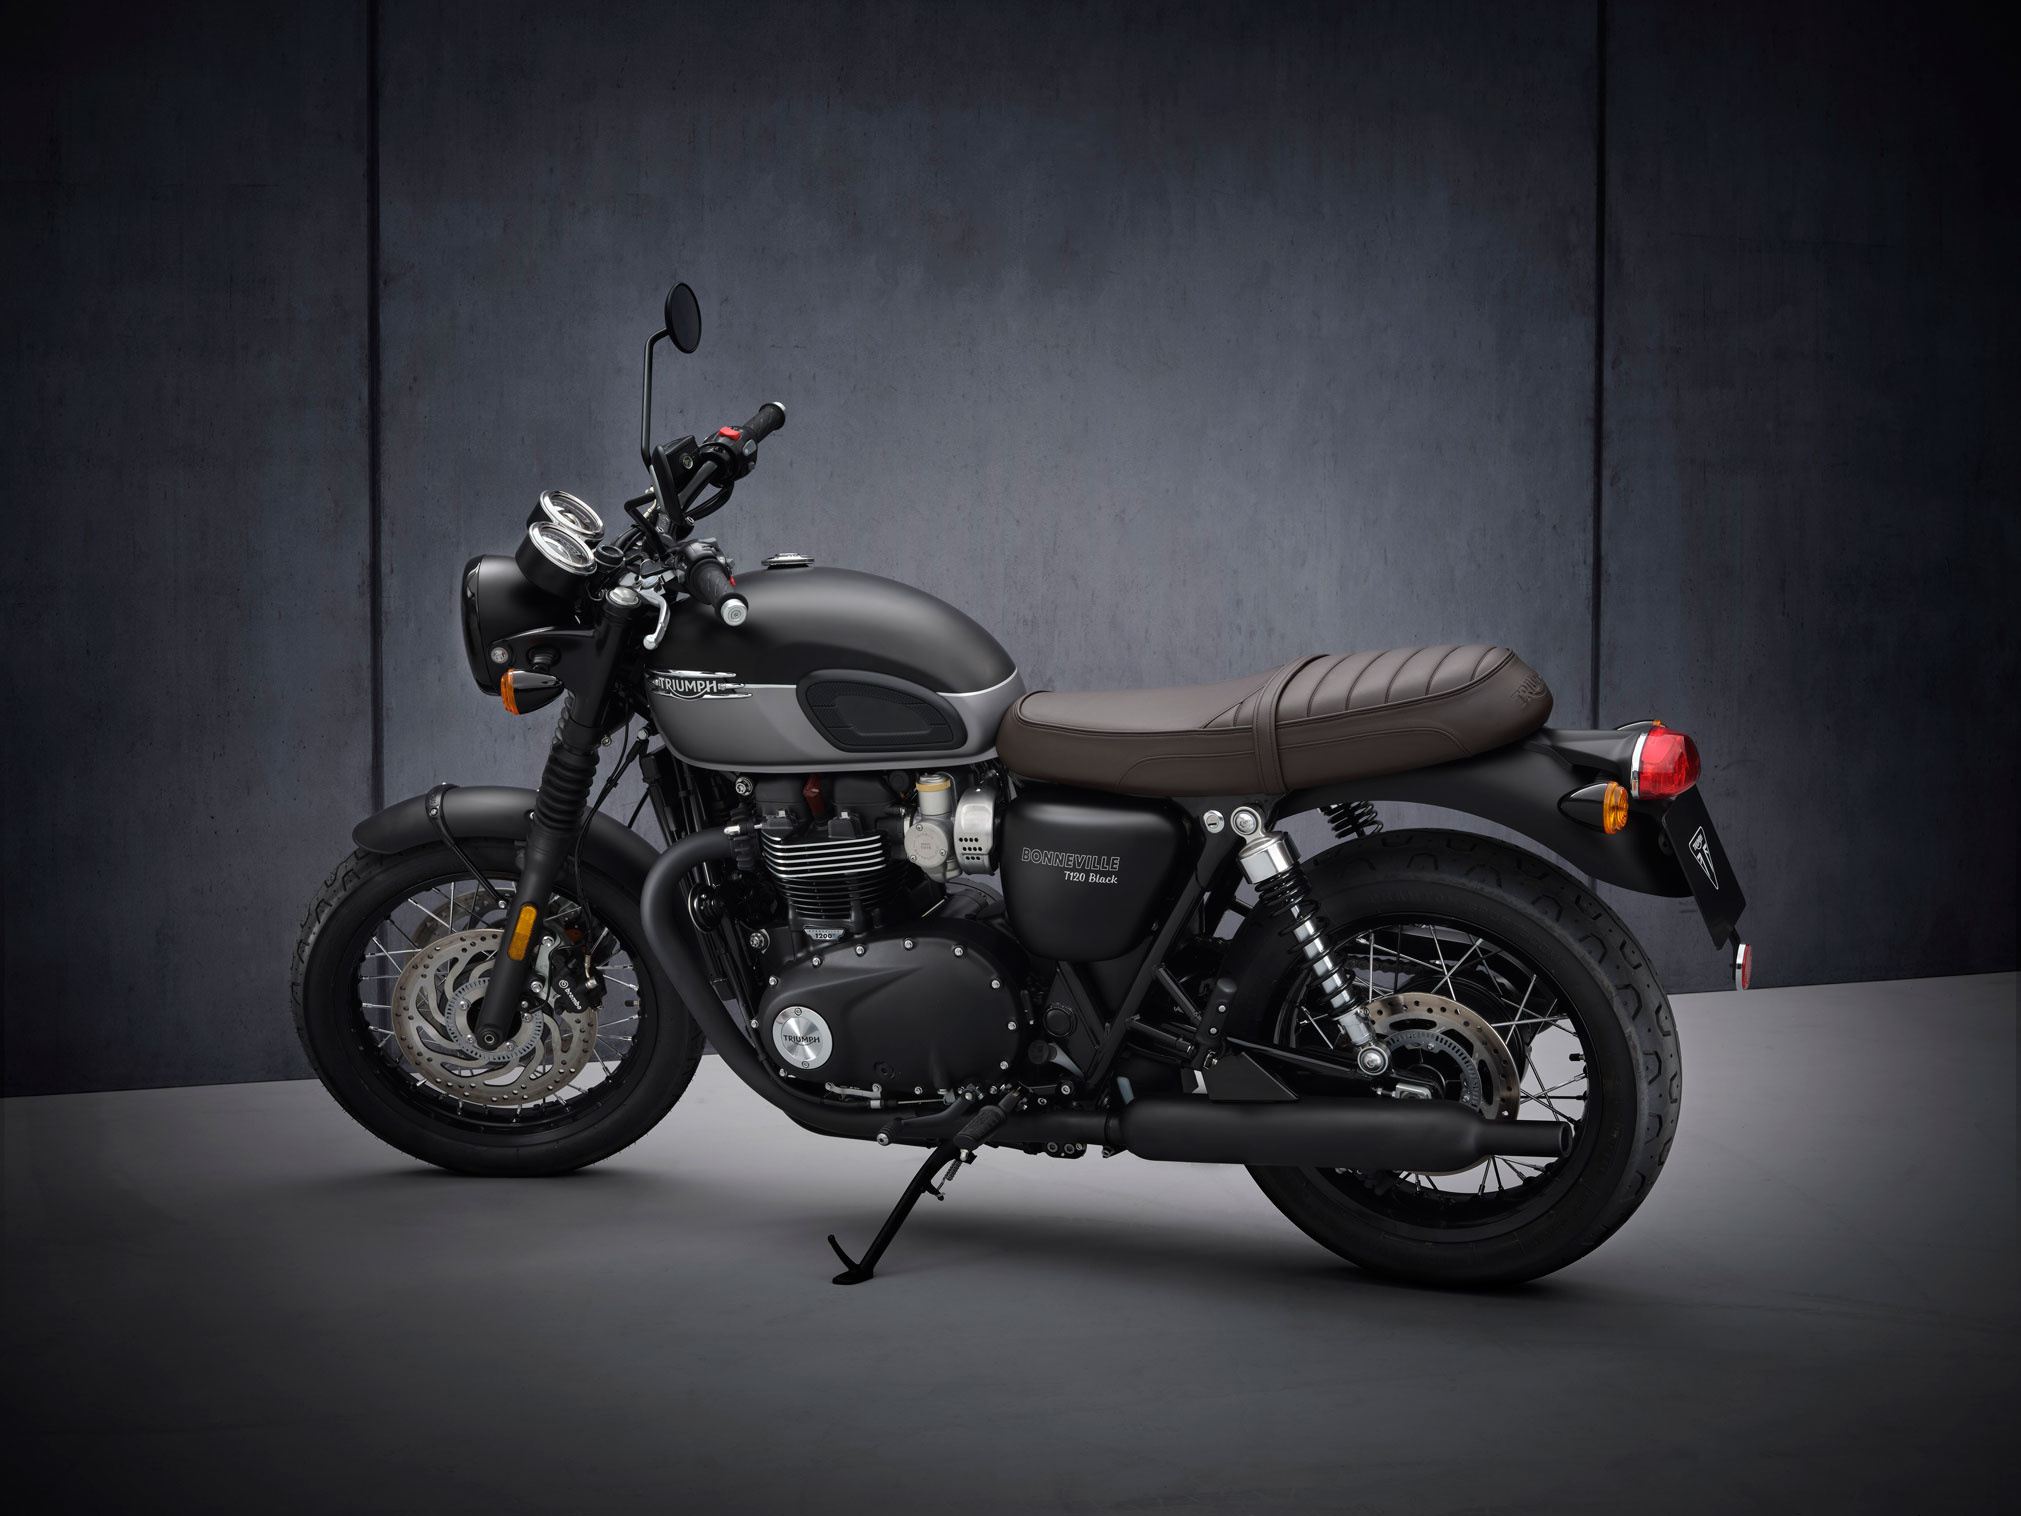 2021 Triumph Bonneville T120 Black, Ultimate guide and review, Sleek and powerful motorcycle, Total Motorcycle's insights, 2030x1520 HD Desktop